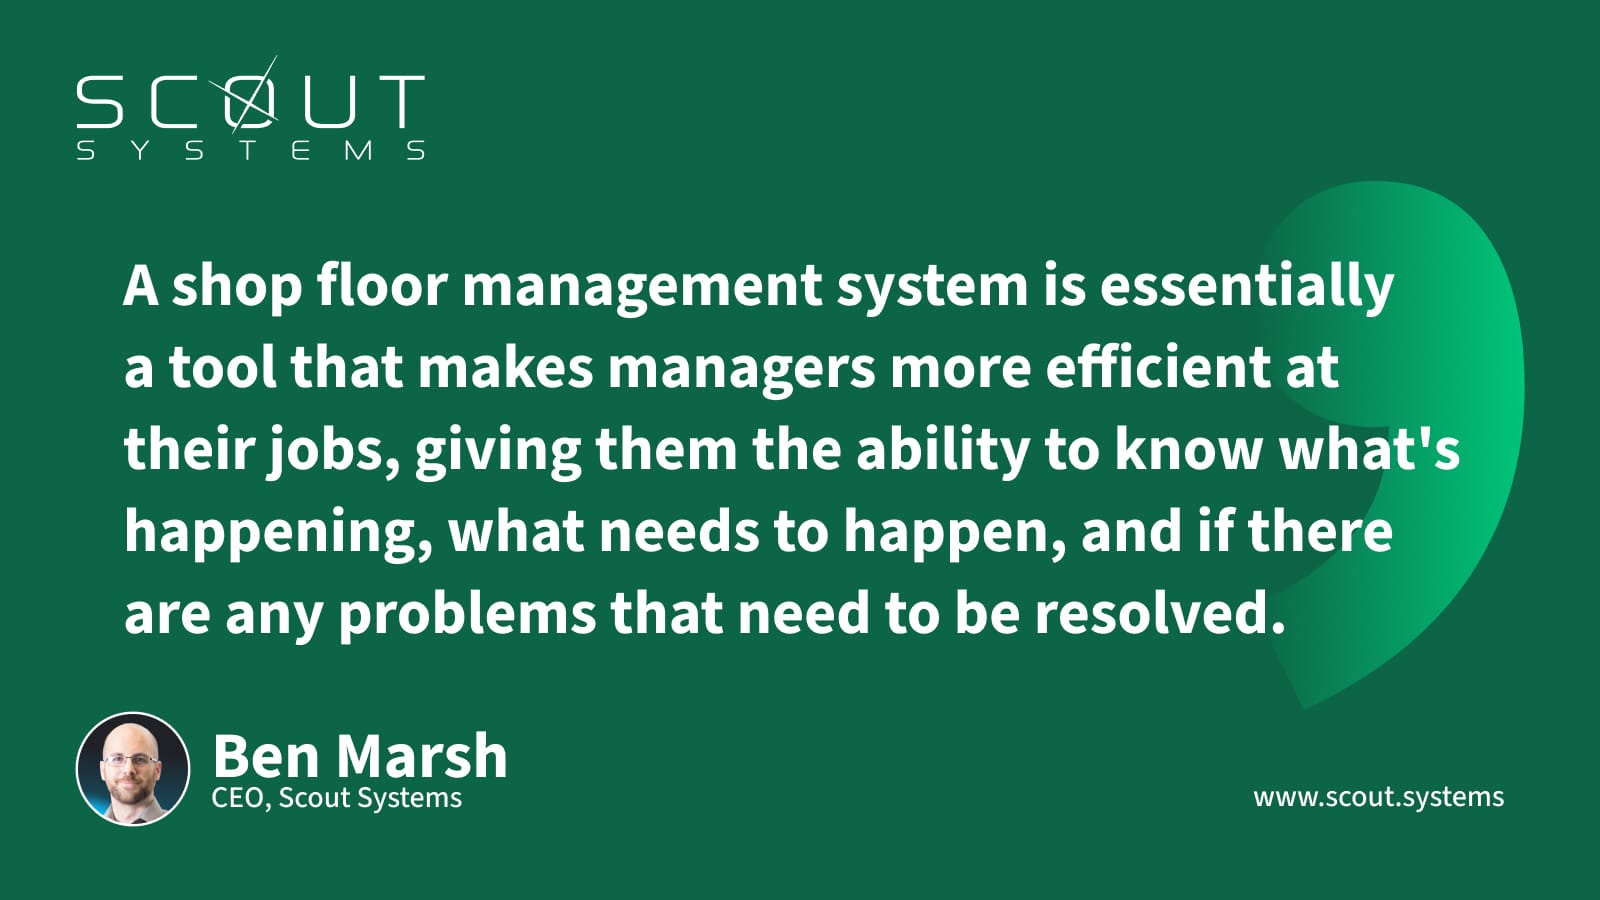 The Top Features to Look for in a Shopfloor Management System